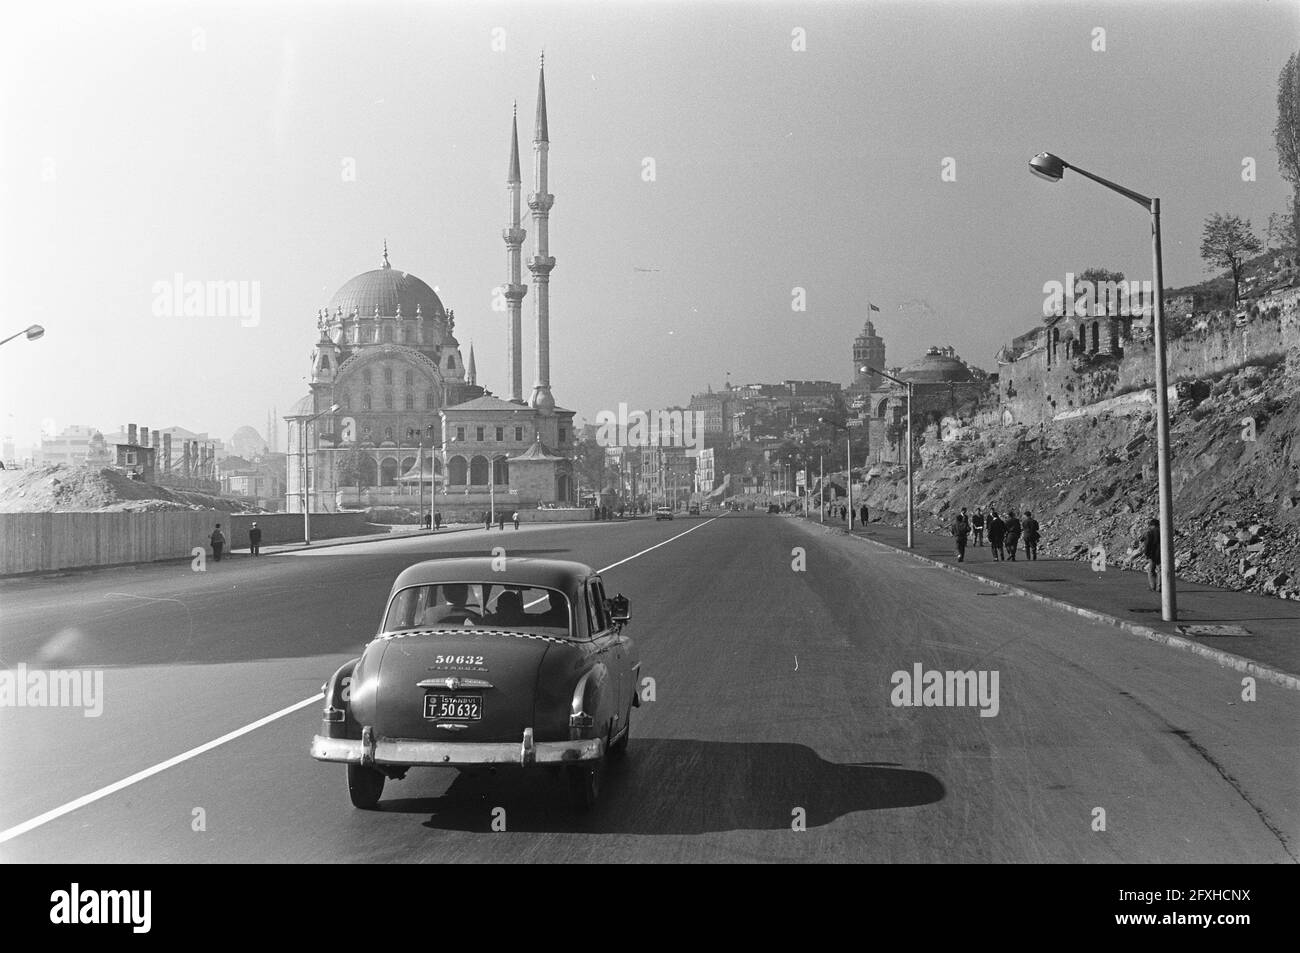 Question mark flight Lockheed Electra to Istanbul, October 29, 1959, cities, The Netherlands, 20th century press agency photo, news to remember, documentary, historic photography 1945-1990, visual stories, human history of the Twentieth Century, capturing moments in time Stock Photo